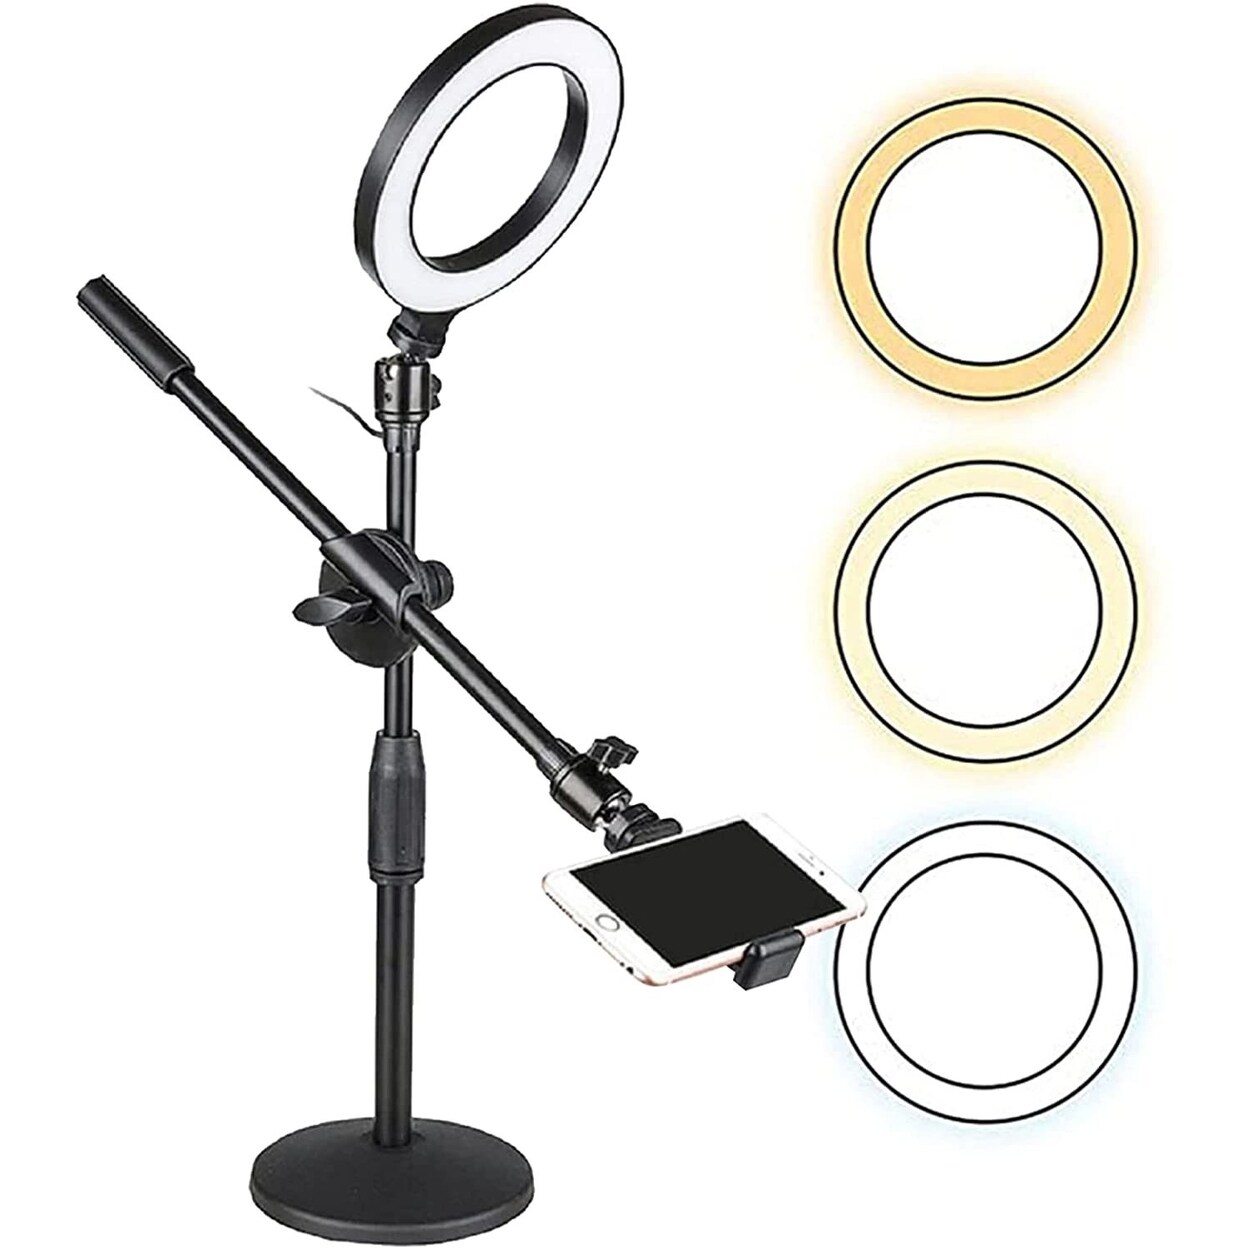 SKUSHOPS 10 Light Overhead Phone Mount LED Circle Lights 360 Adjustable Shooting Arm Dimmable for Video Recording Live Streaming